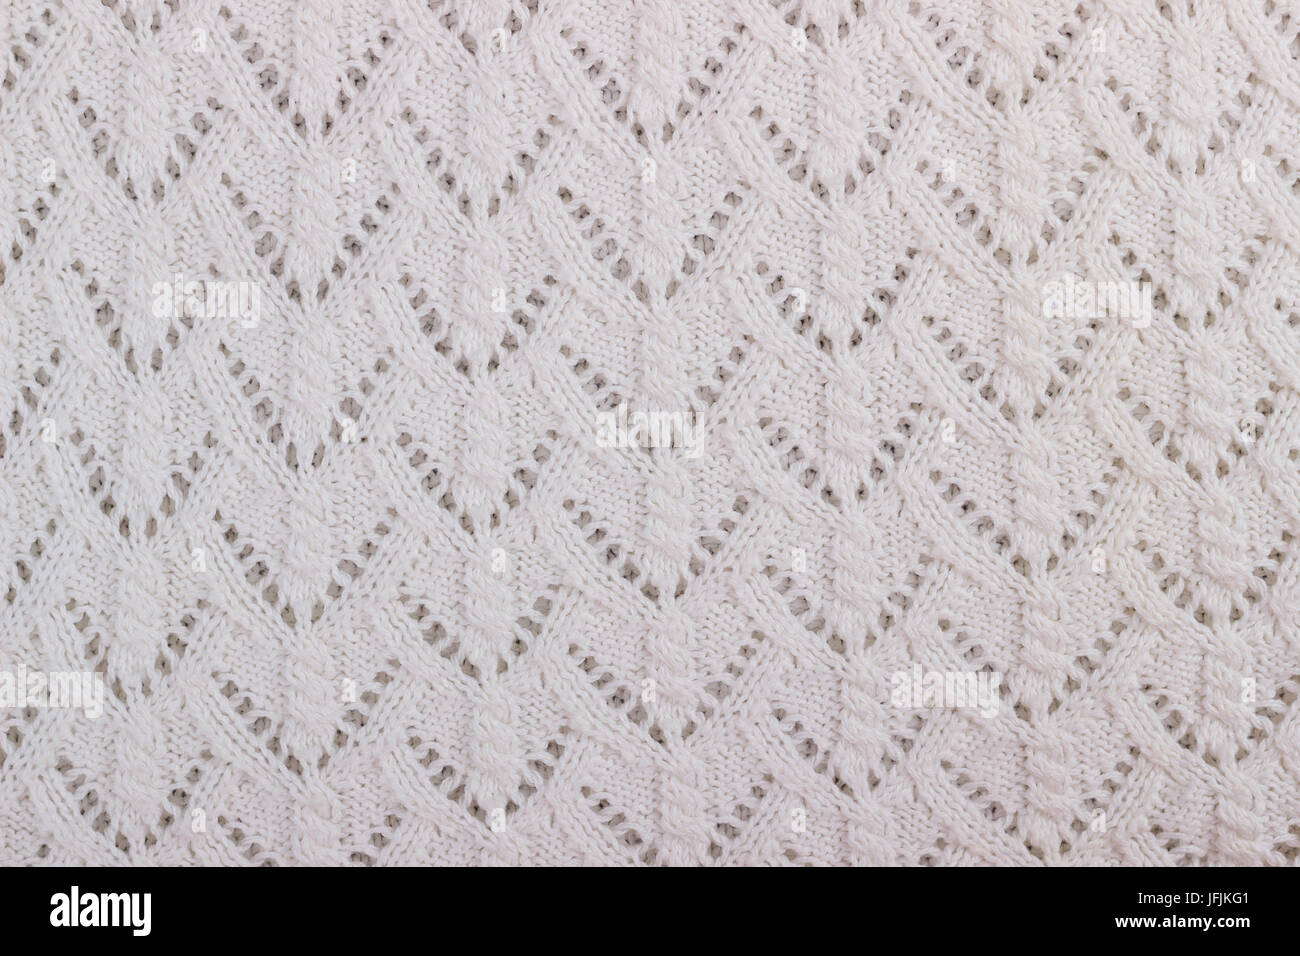 Texture of knitted woolen fabric Stock Photo